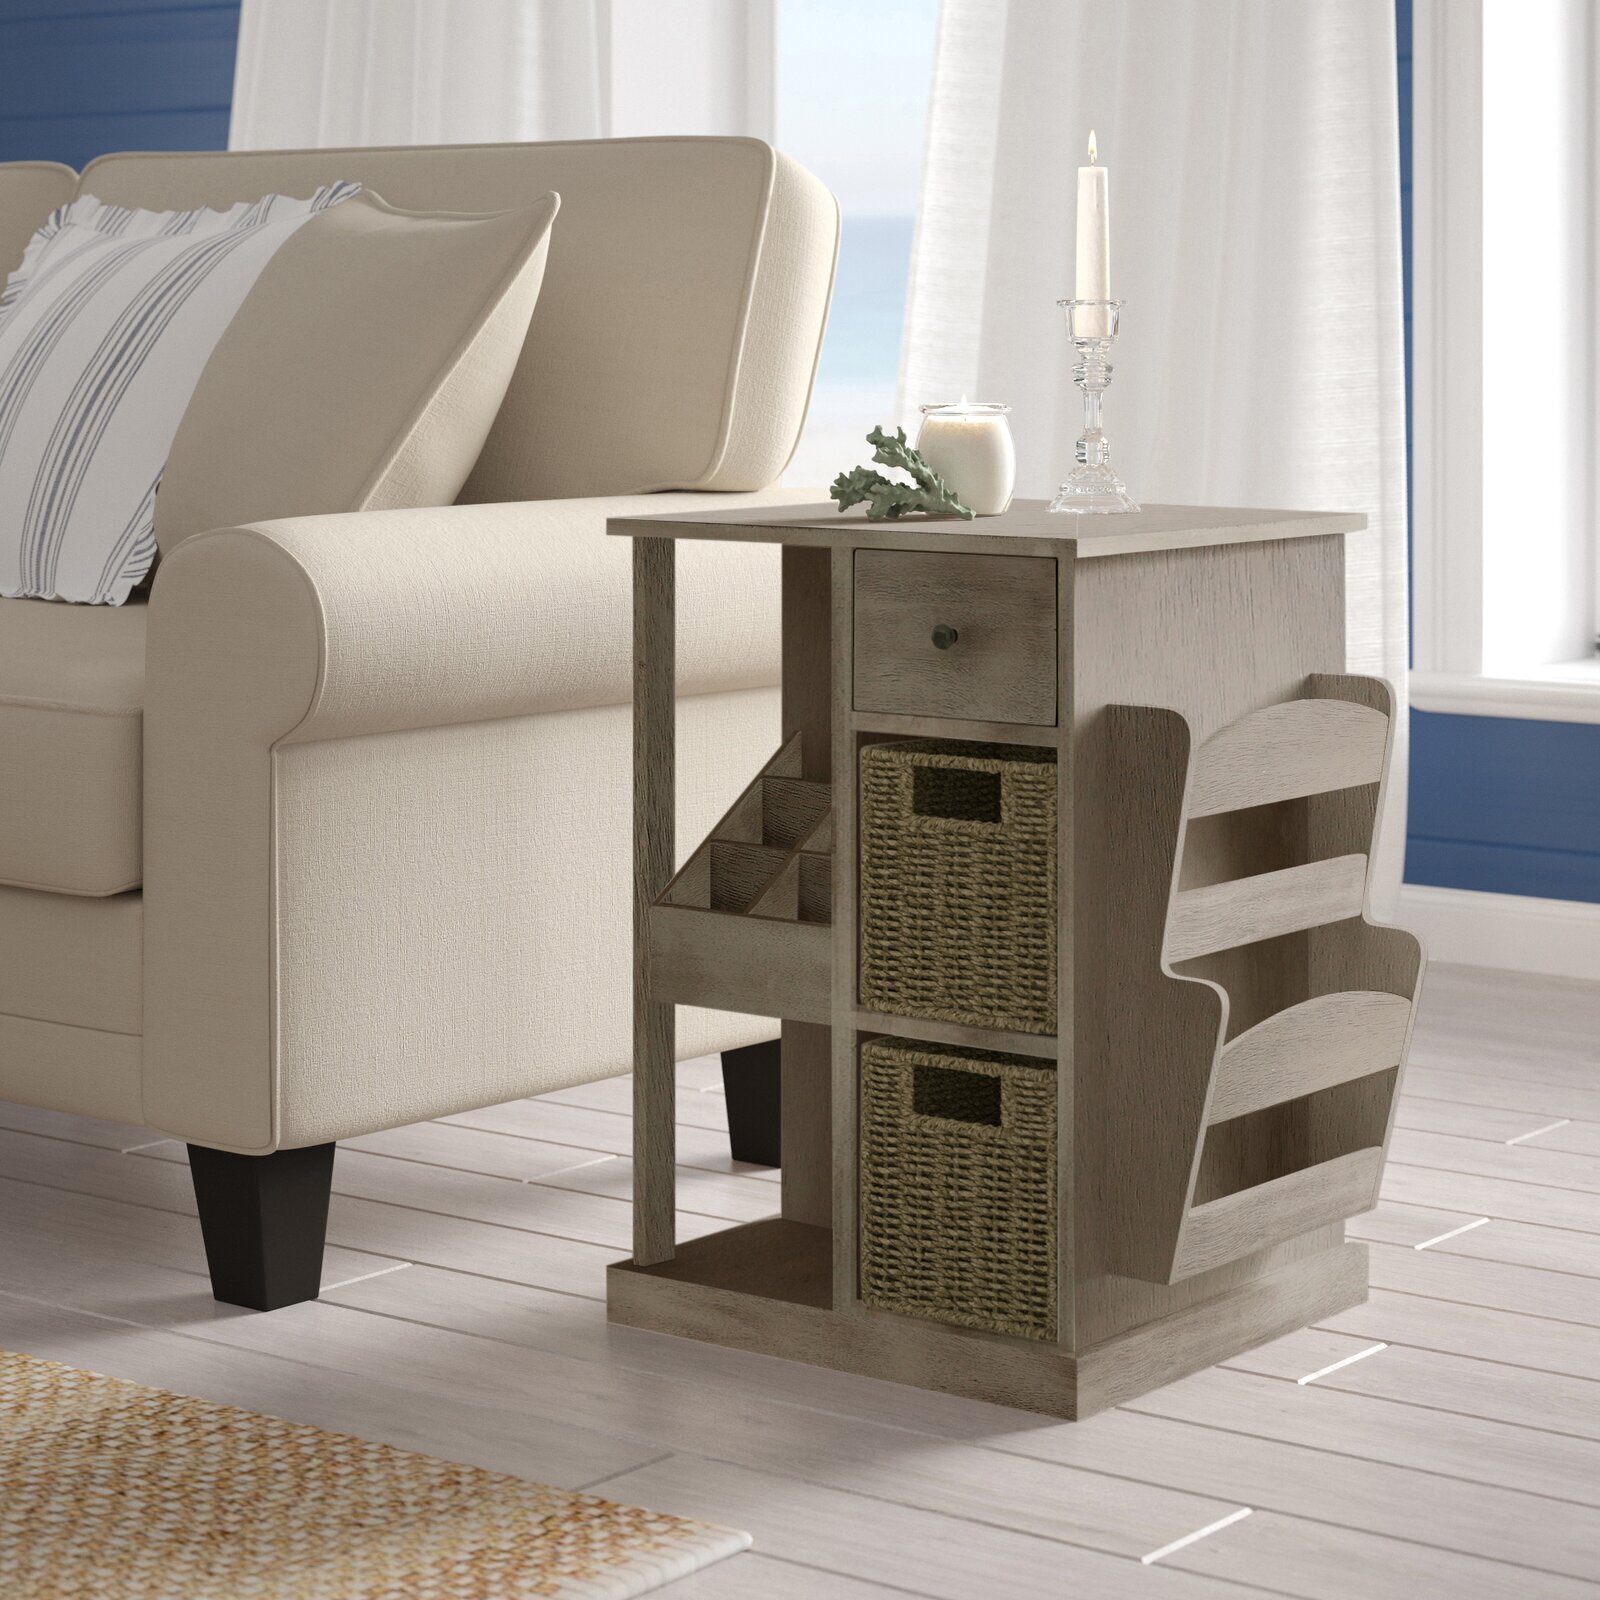 Magazine rack side table in farmhouse style